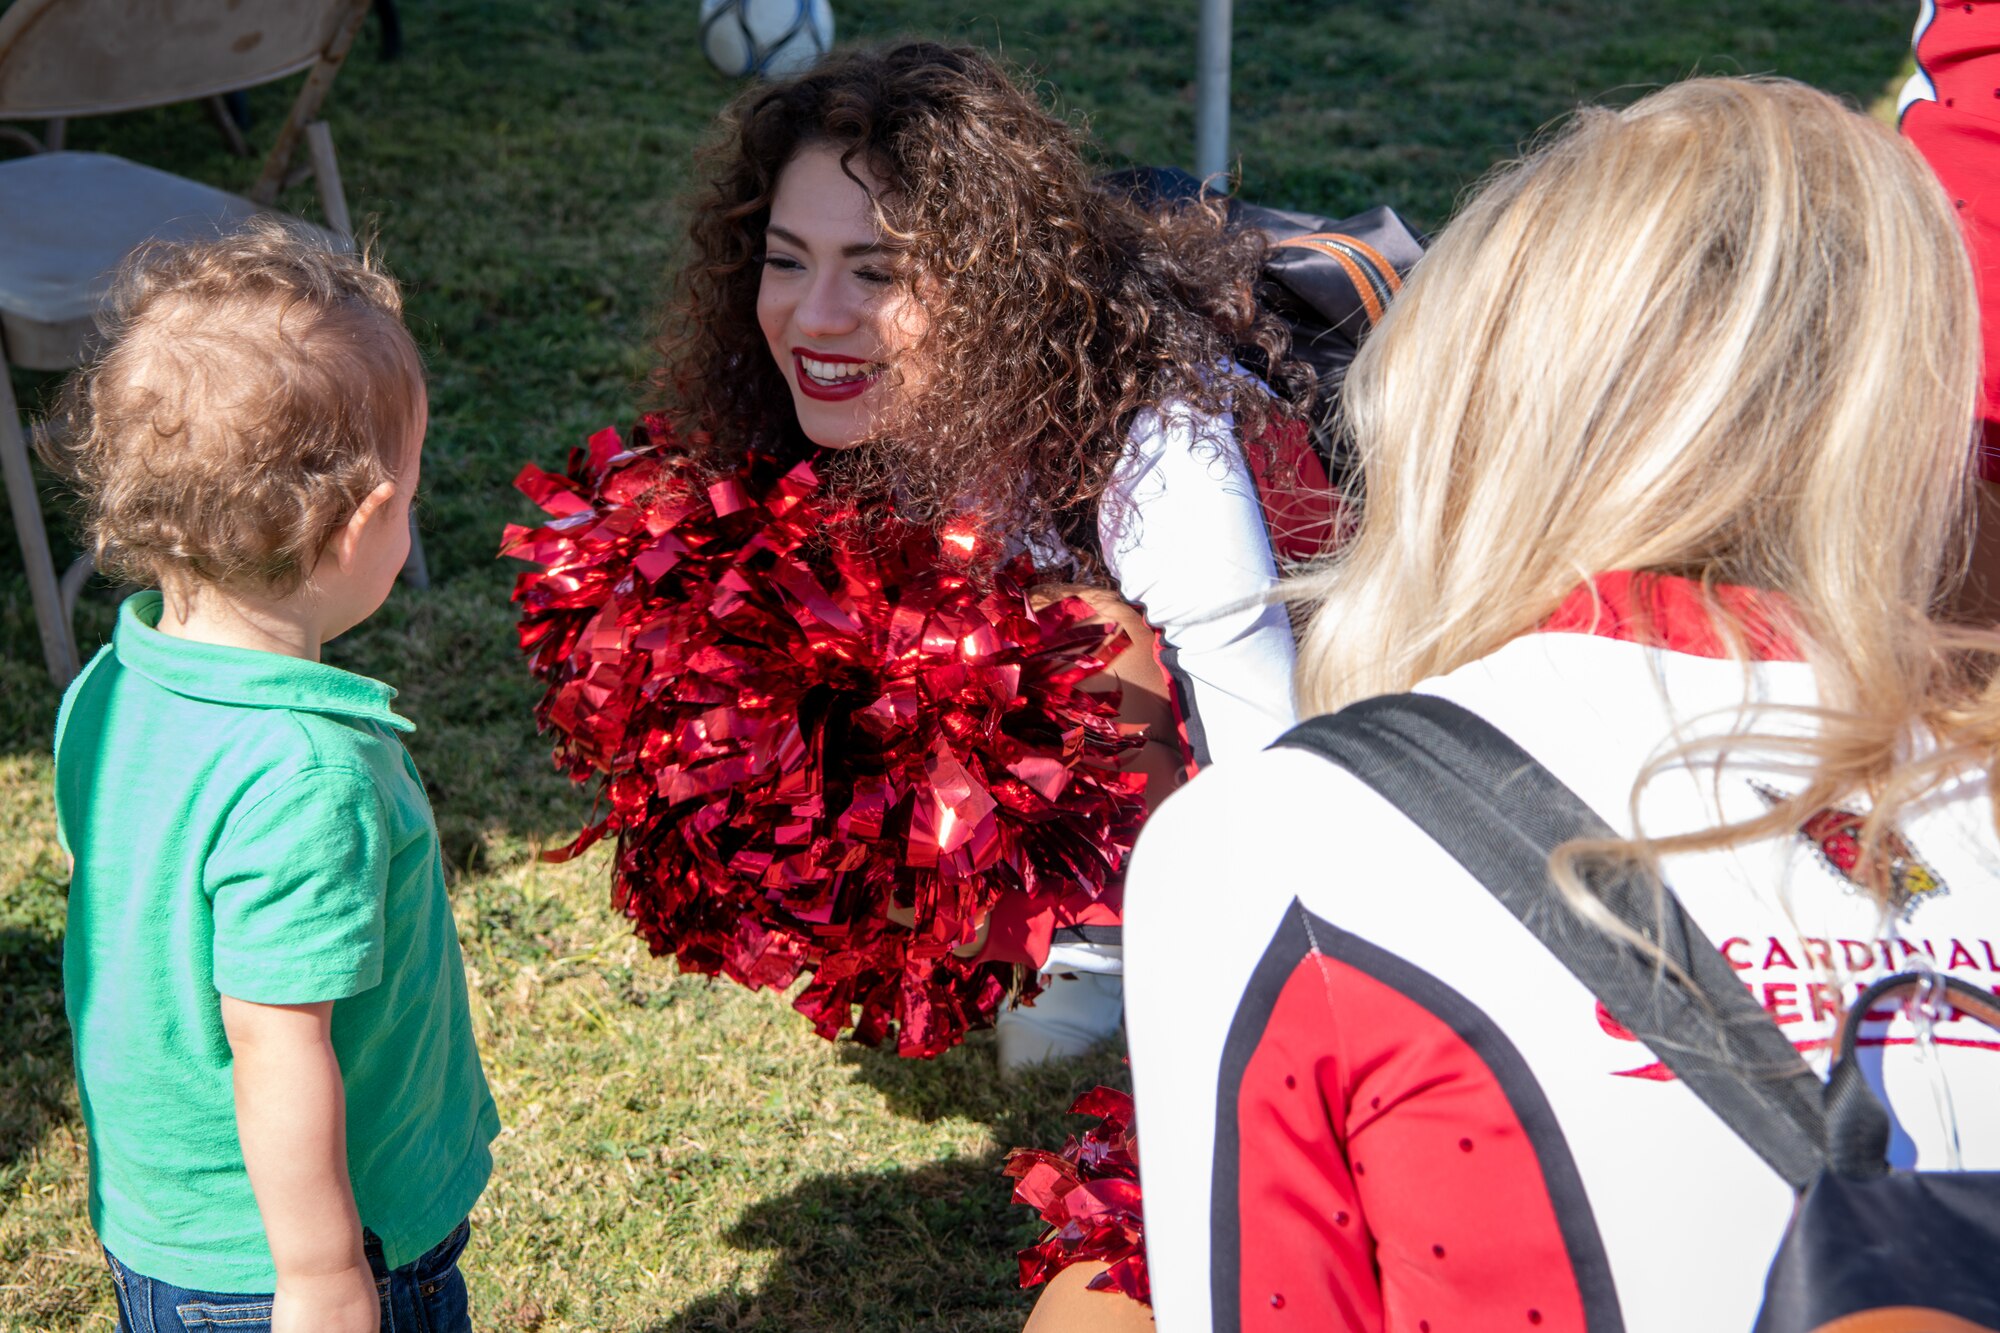 Arizona Cardinals cheerleaders interact with one of our littlest Thunderbolts Nov. 4, 2021, at Luke Air Force Base, Arizona.